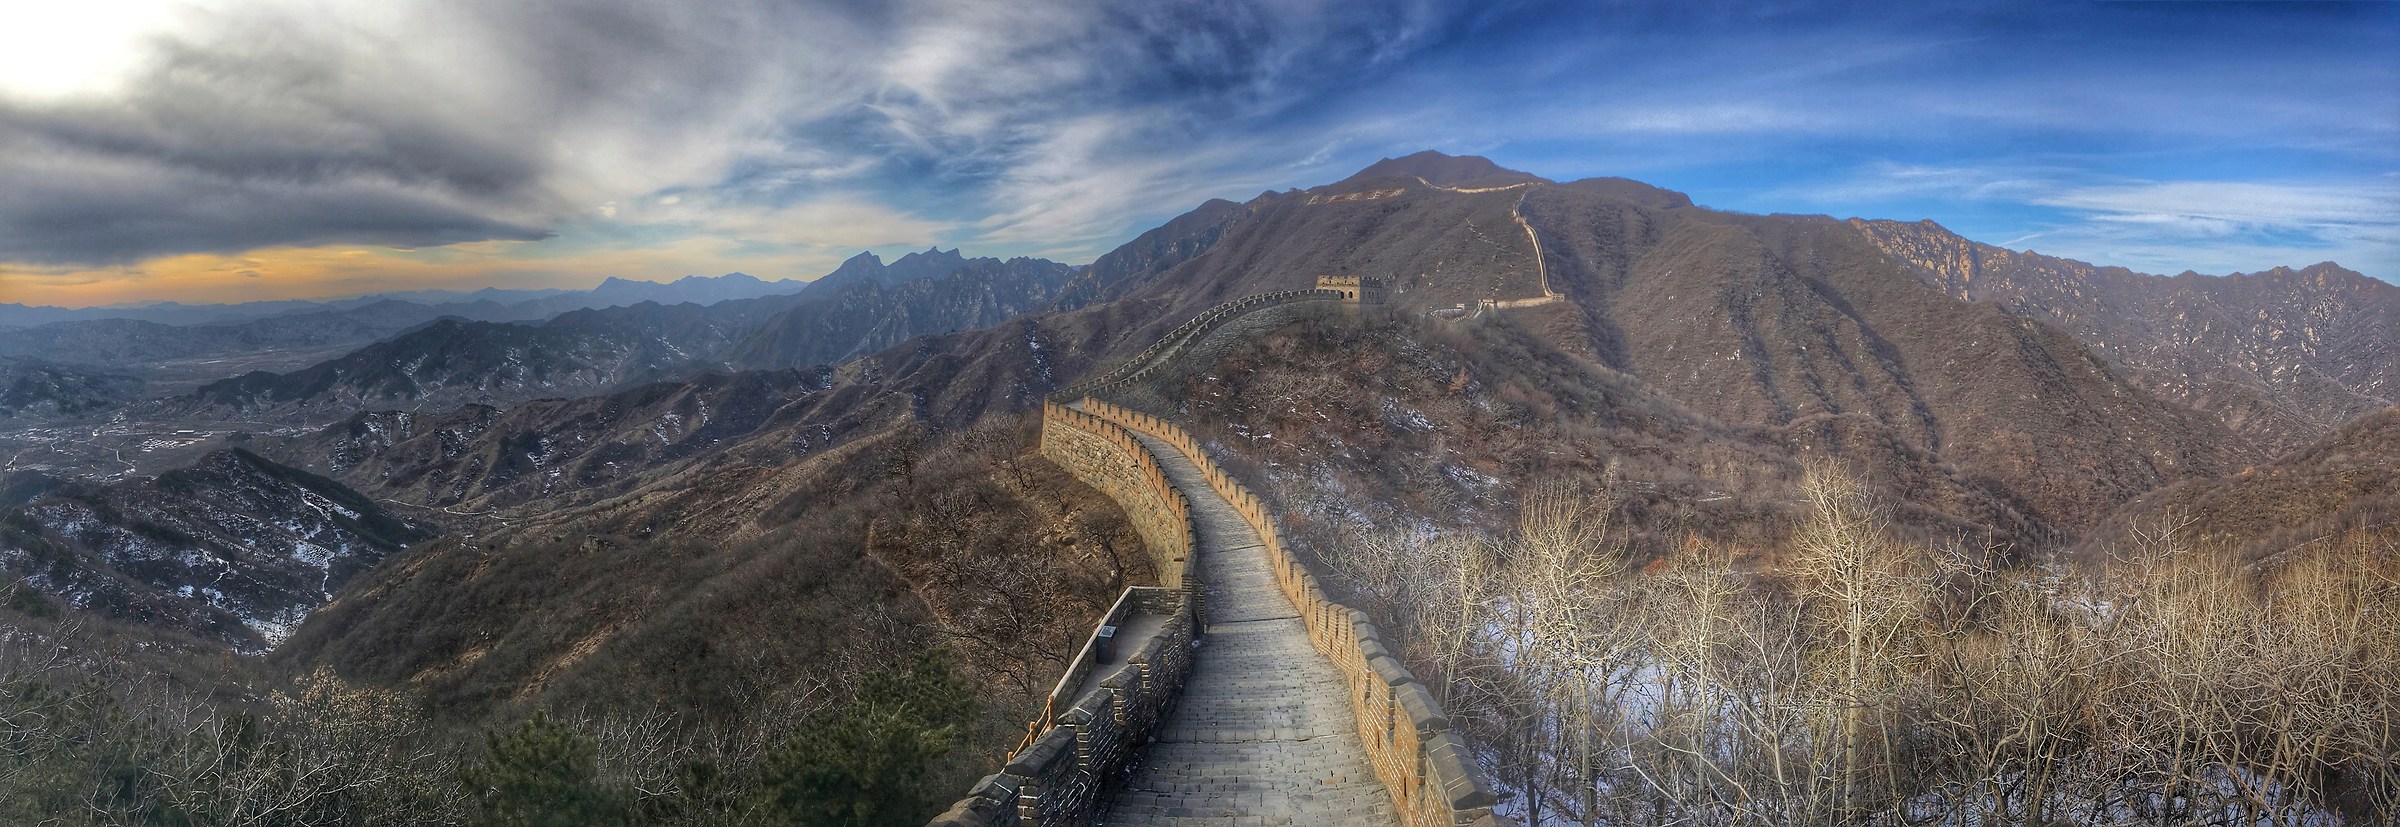 The Great Wall with Iphone...